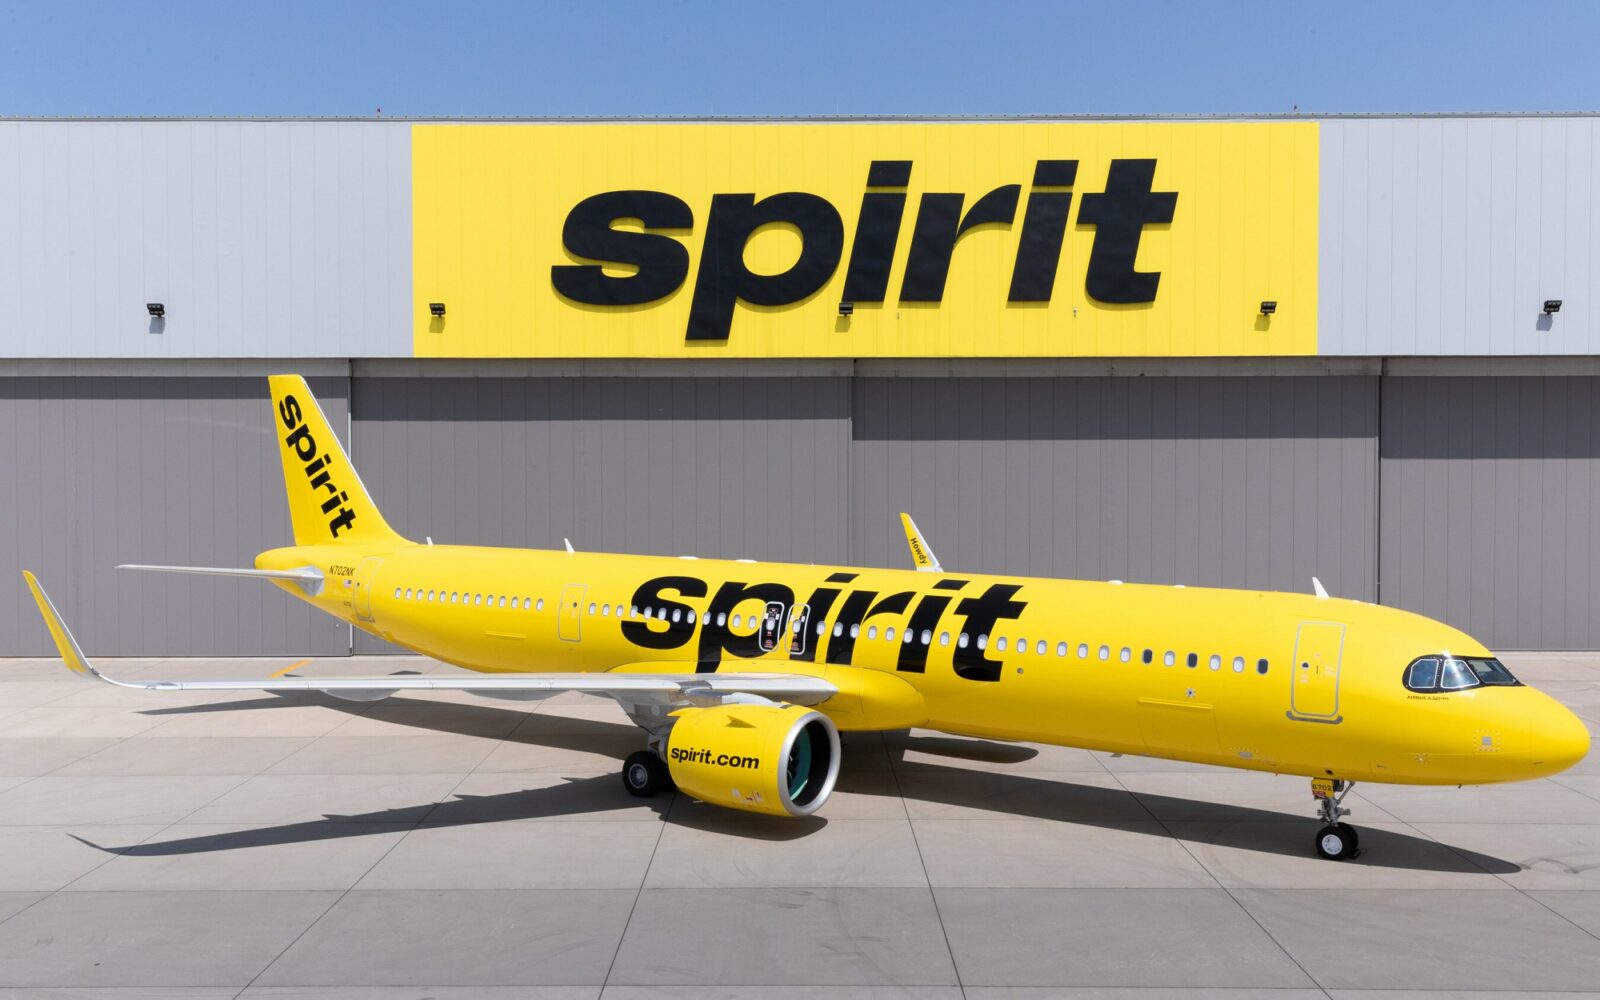 Spirit Airlines fleet gets ‘fitter’ with first A321neo AeroTime